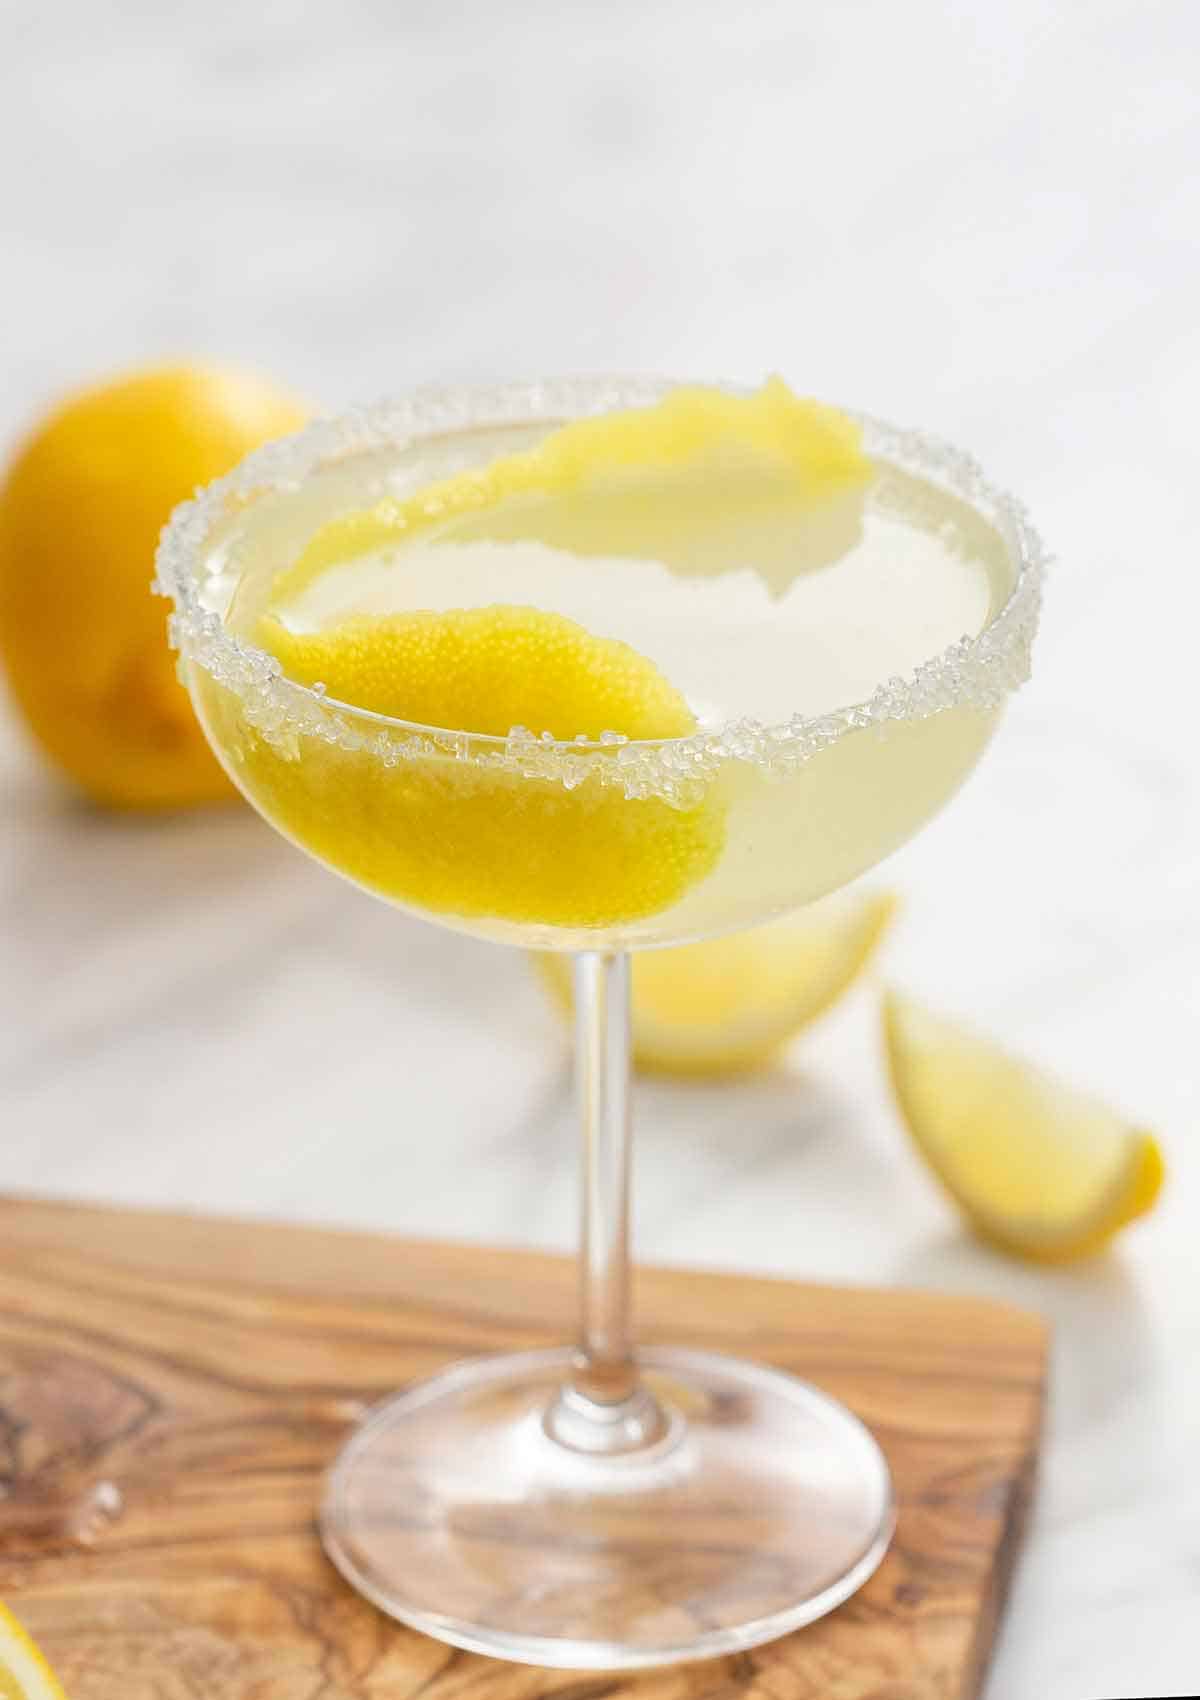 A glass of lemon drop martini with a lemon peel in the glass and a sugared rim.